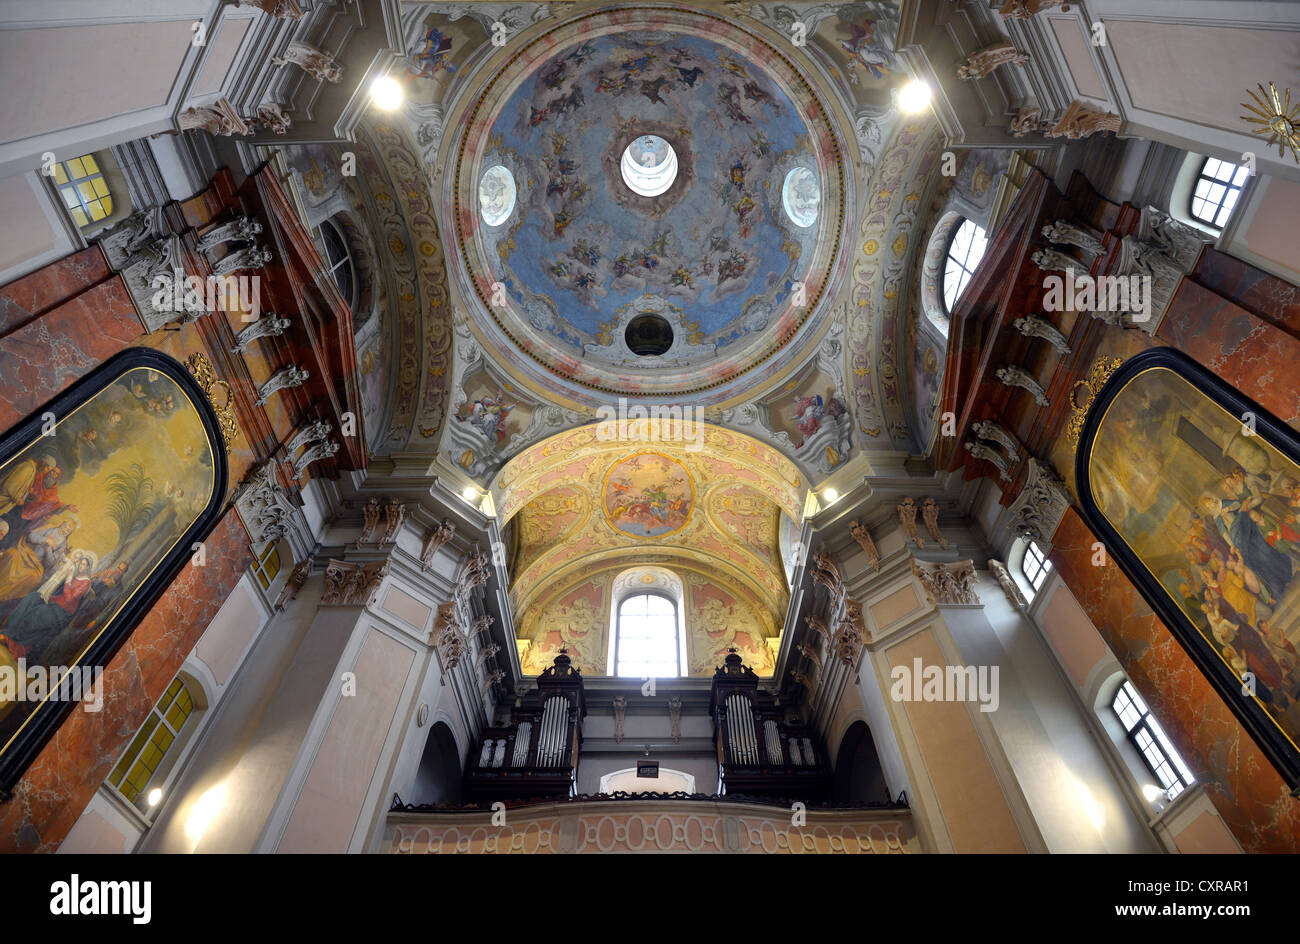 Interior view, side altar, organ, large dome fresco of St. Francis, St. Francis of Assisi, Baroque dome Stock Photo